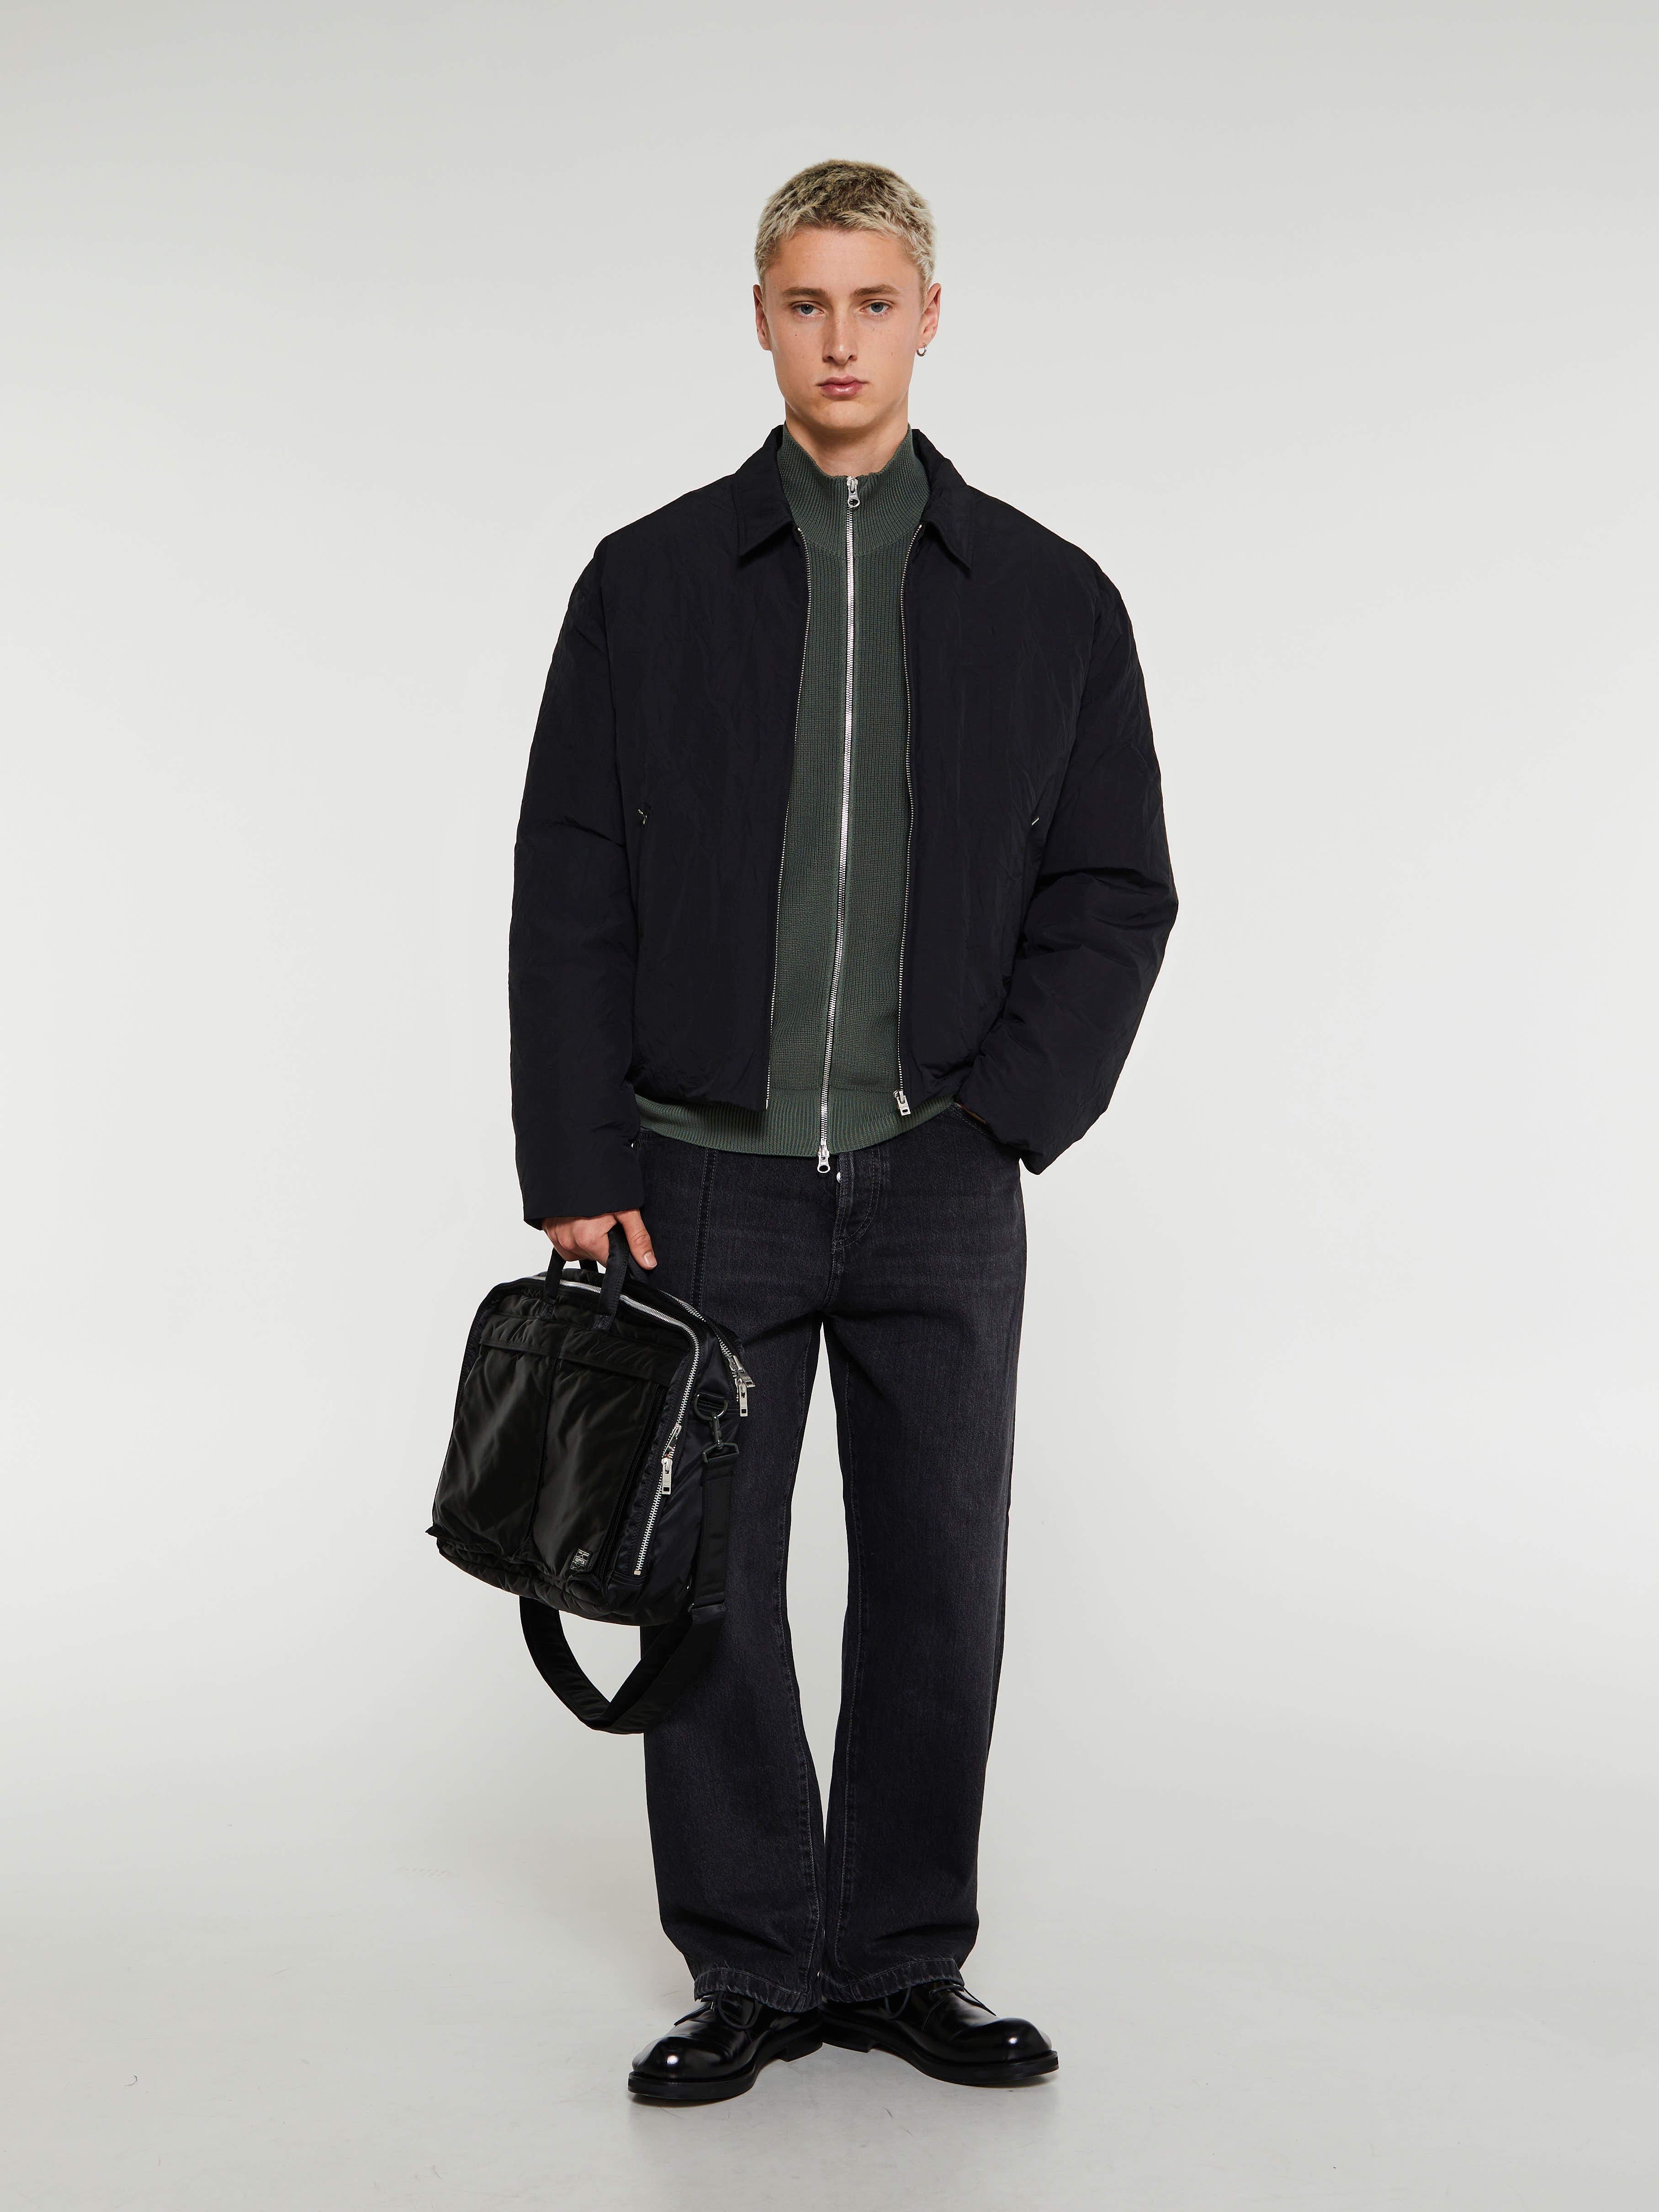 Acne Studios | Shop new arrivals from Acne Studios at stoy